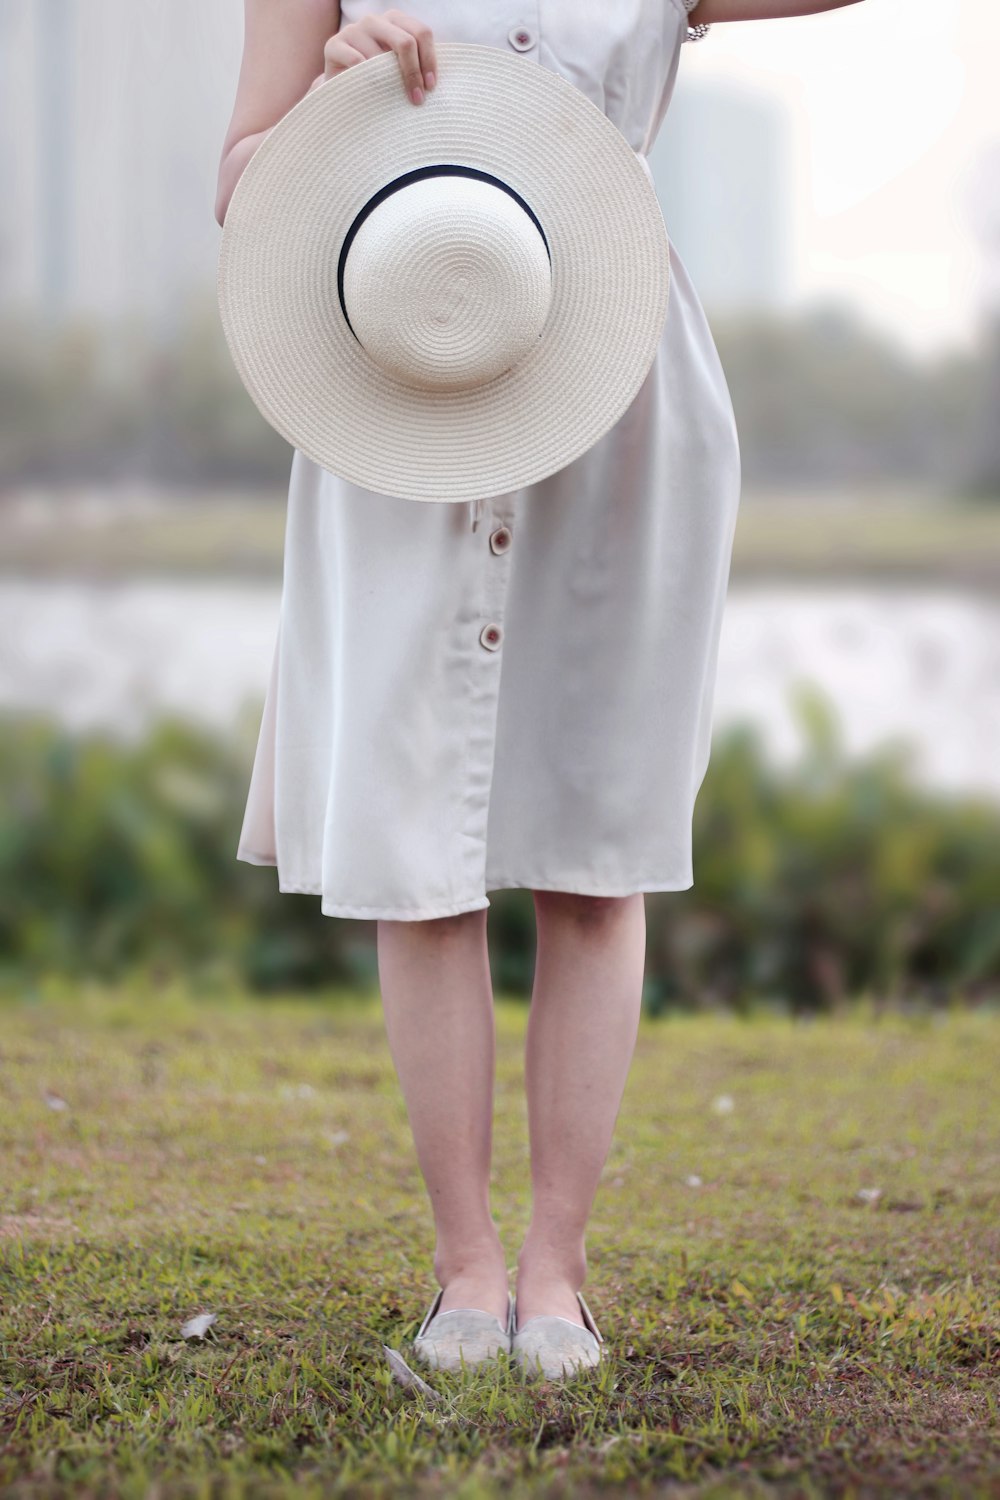 woman in white dress wearing white sun hat standing on green grass field during daytime